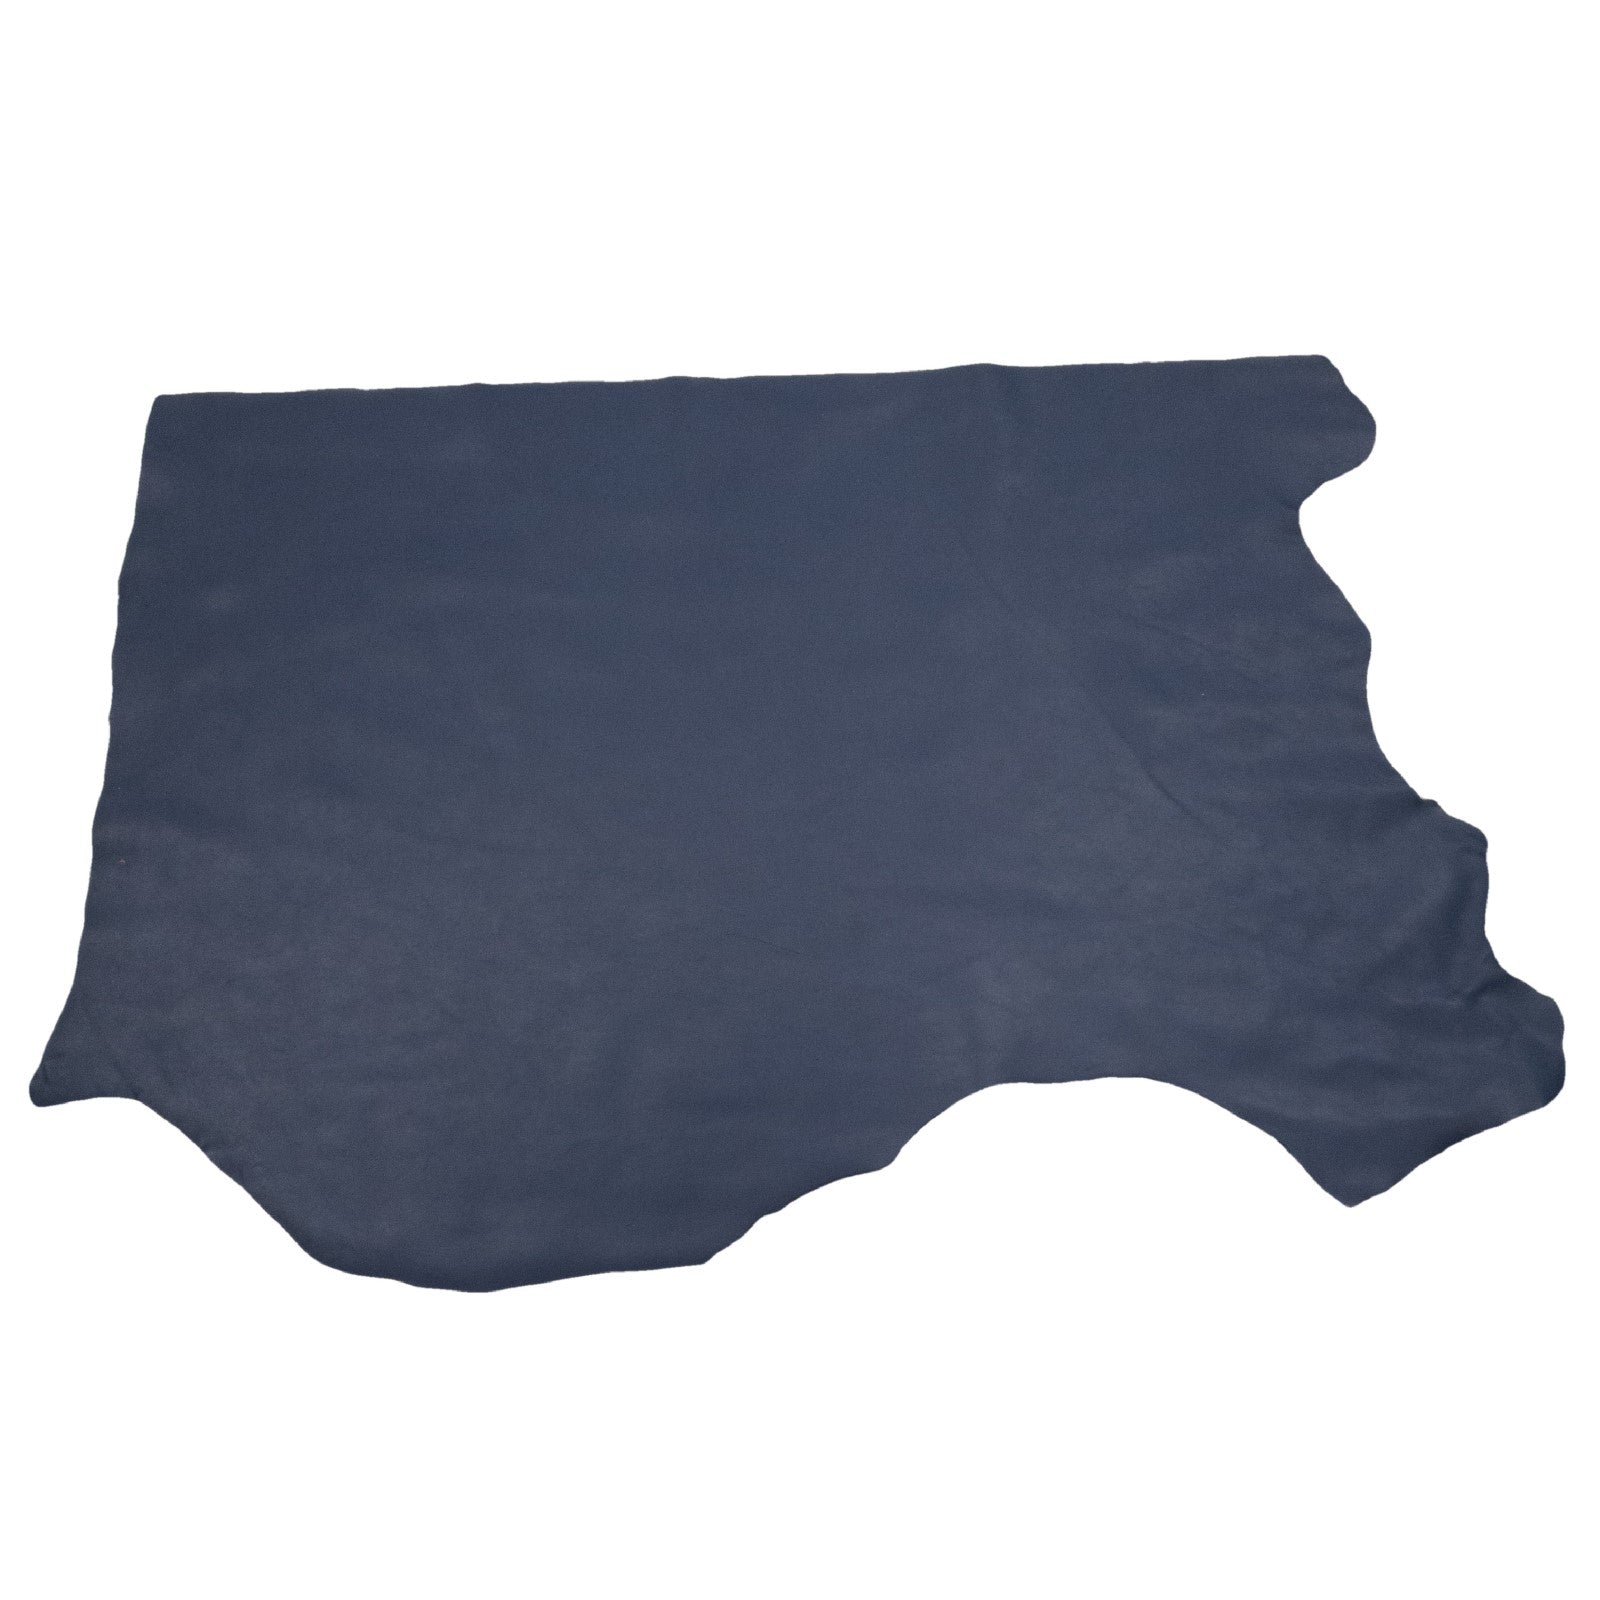 Da Bears Navy Blue, 3-3.5 oz Cow Hides, Starting Lineup, Bottom Piece / 6.5-7.5 Sq Ft | The Leather Guy